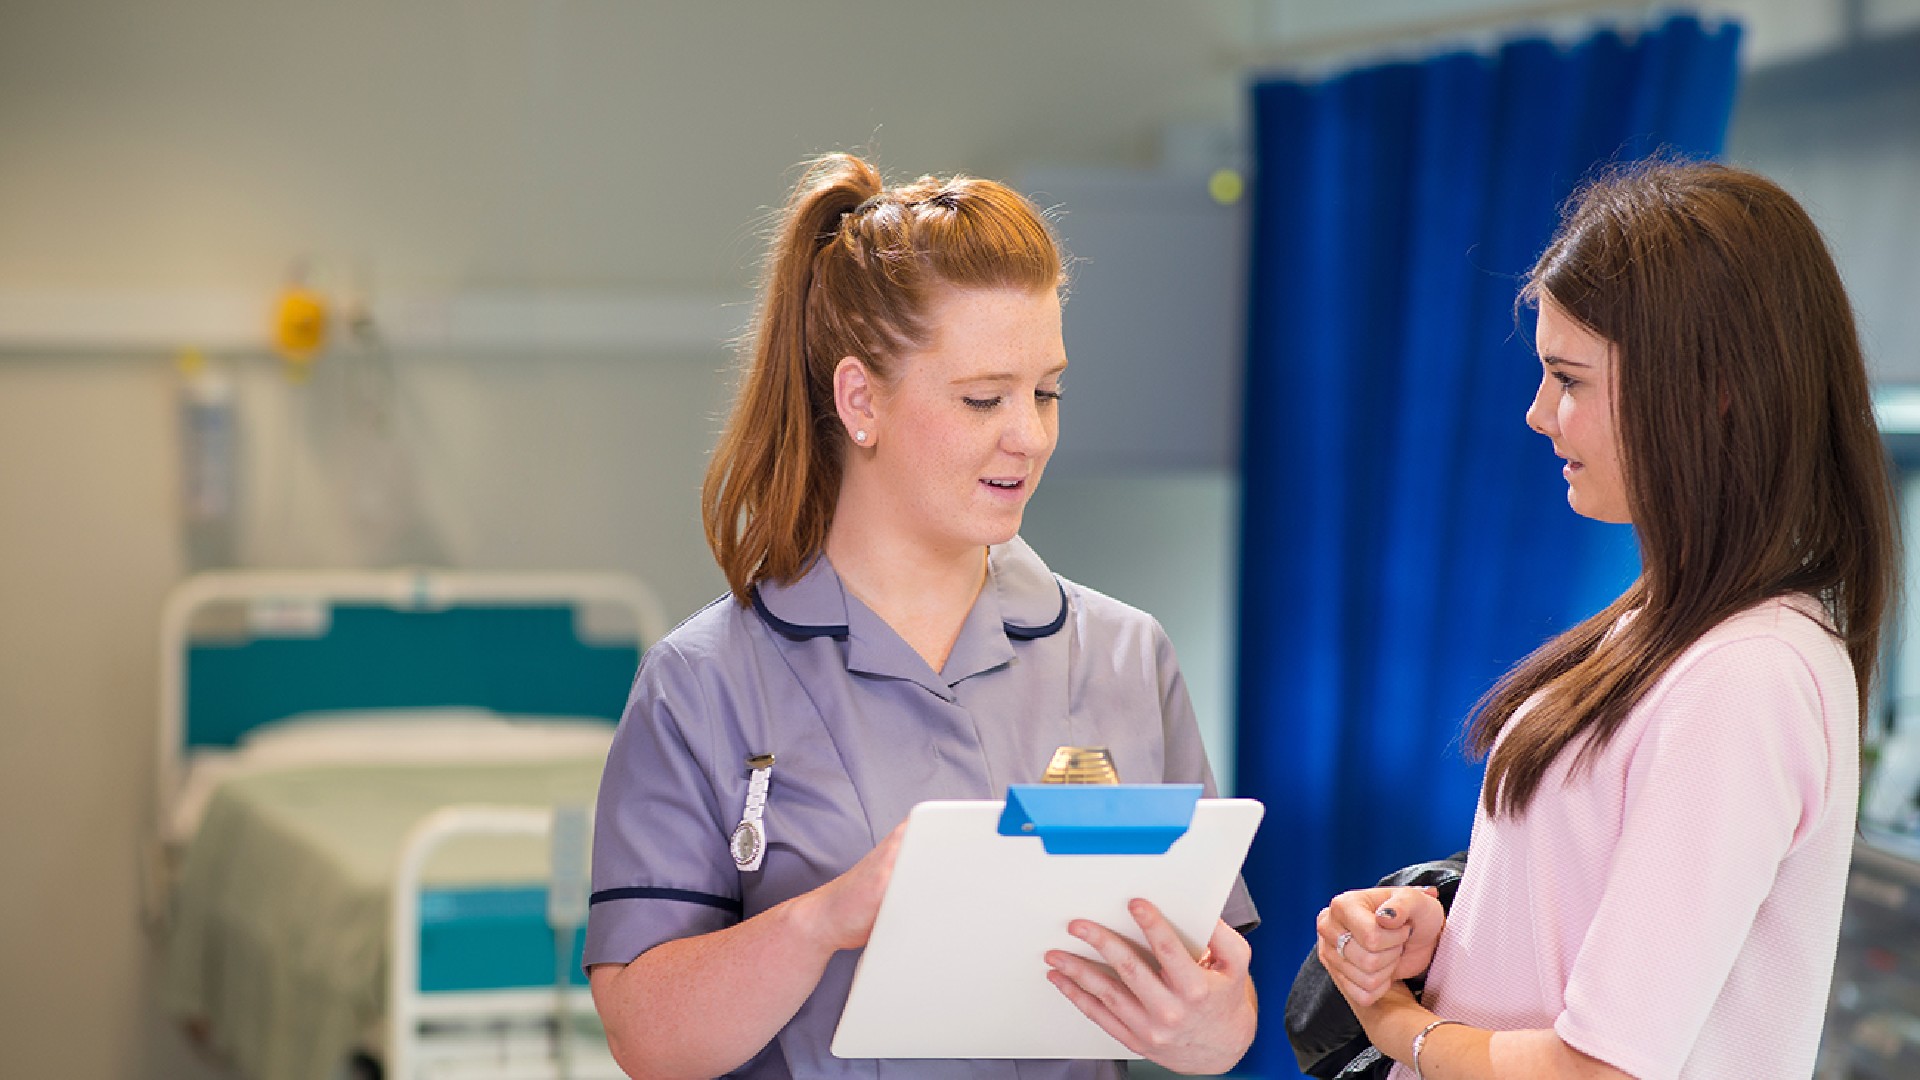 A student nurse is talking to a patient. The nurse is reading from a clipboard. There is an empty hospital bed in the background and a blue curtain to the right of it.